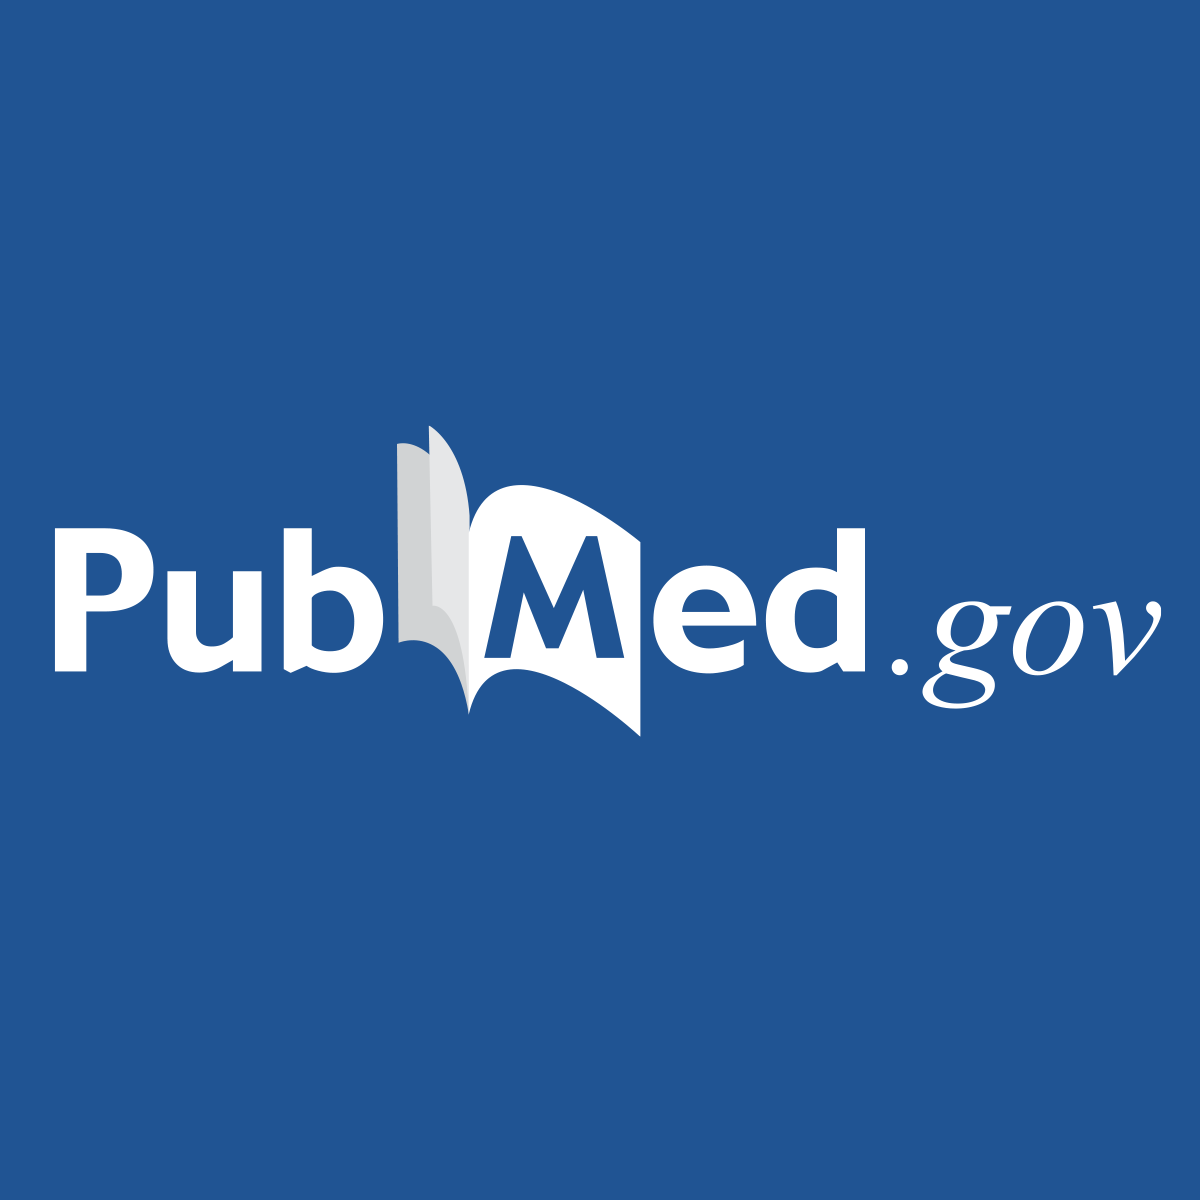 Influenza vaccination in patients with lung cancer receiving anti-programmed death receptor 1 immunotherapy does not induce immune-related adverse events - PubMed